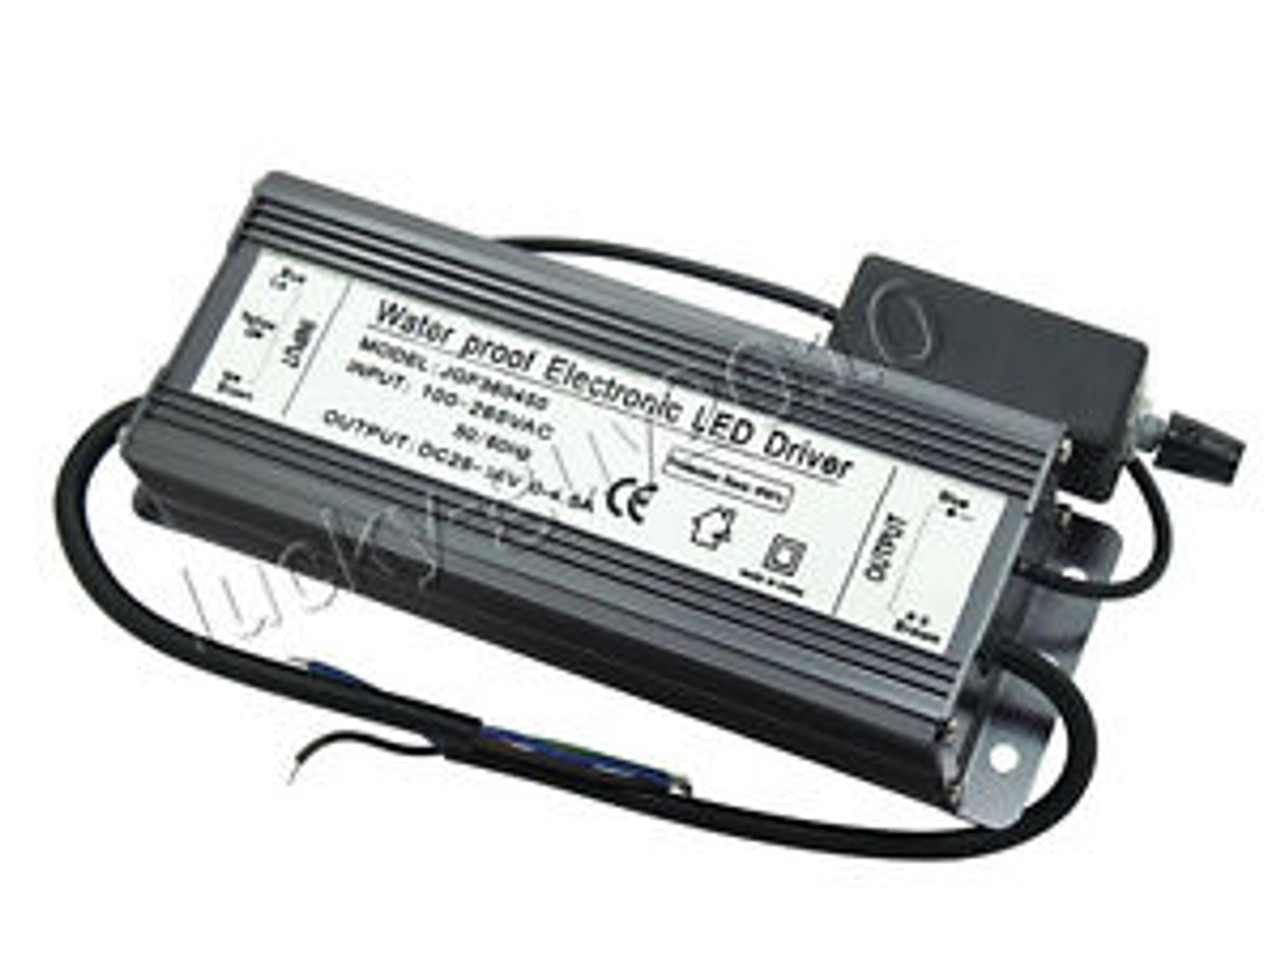 Magnitude 300W 12VDC Magnetic Dimmable LED Driver M300L12DC Outdoor Rated 